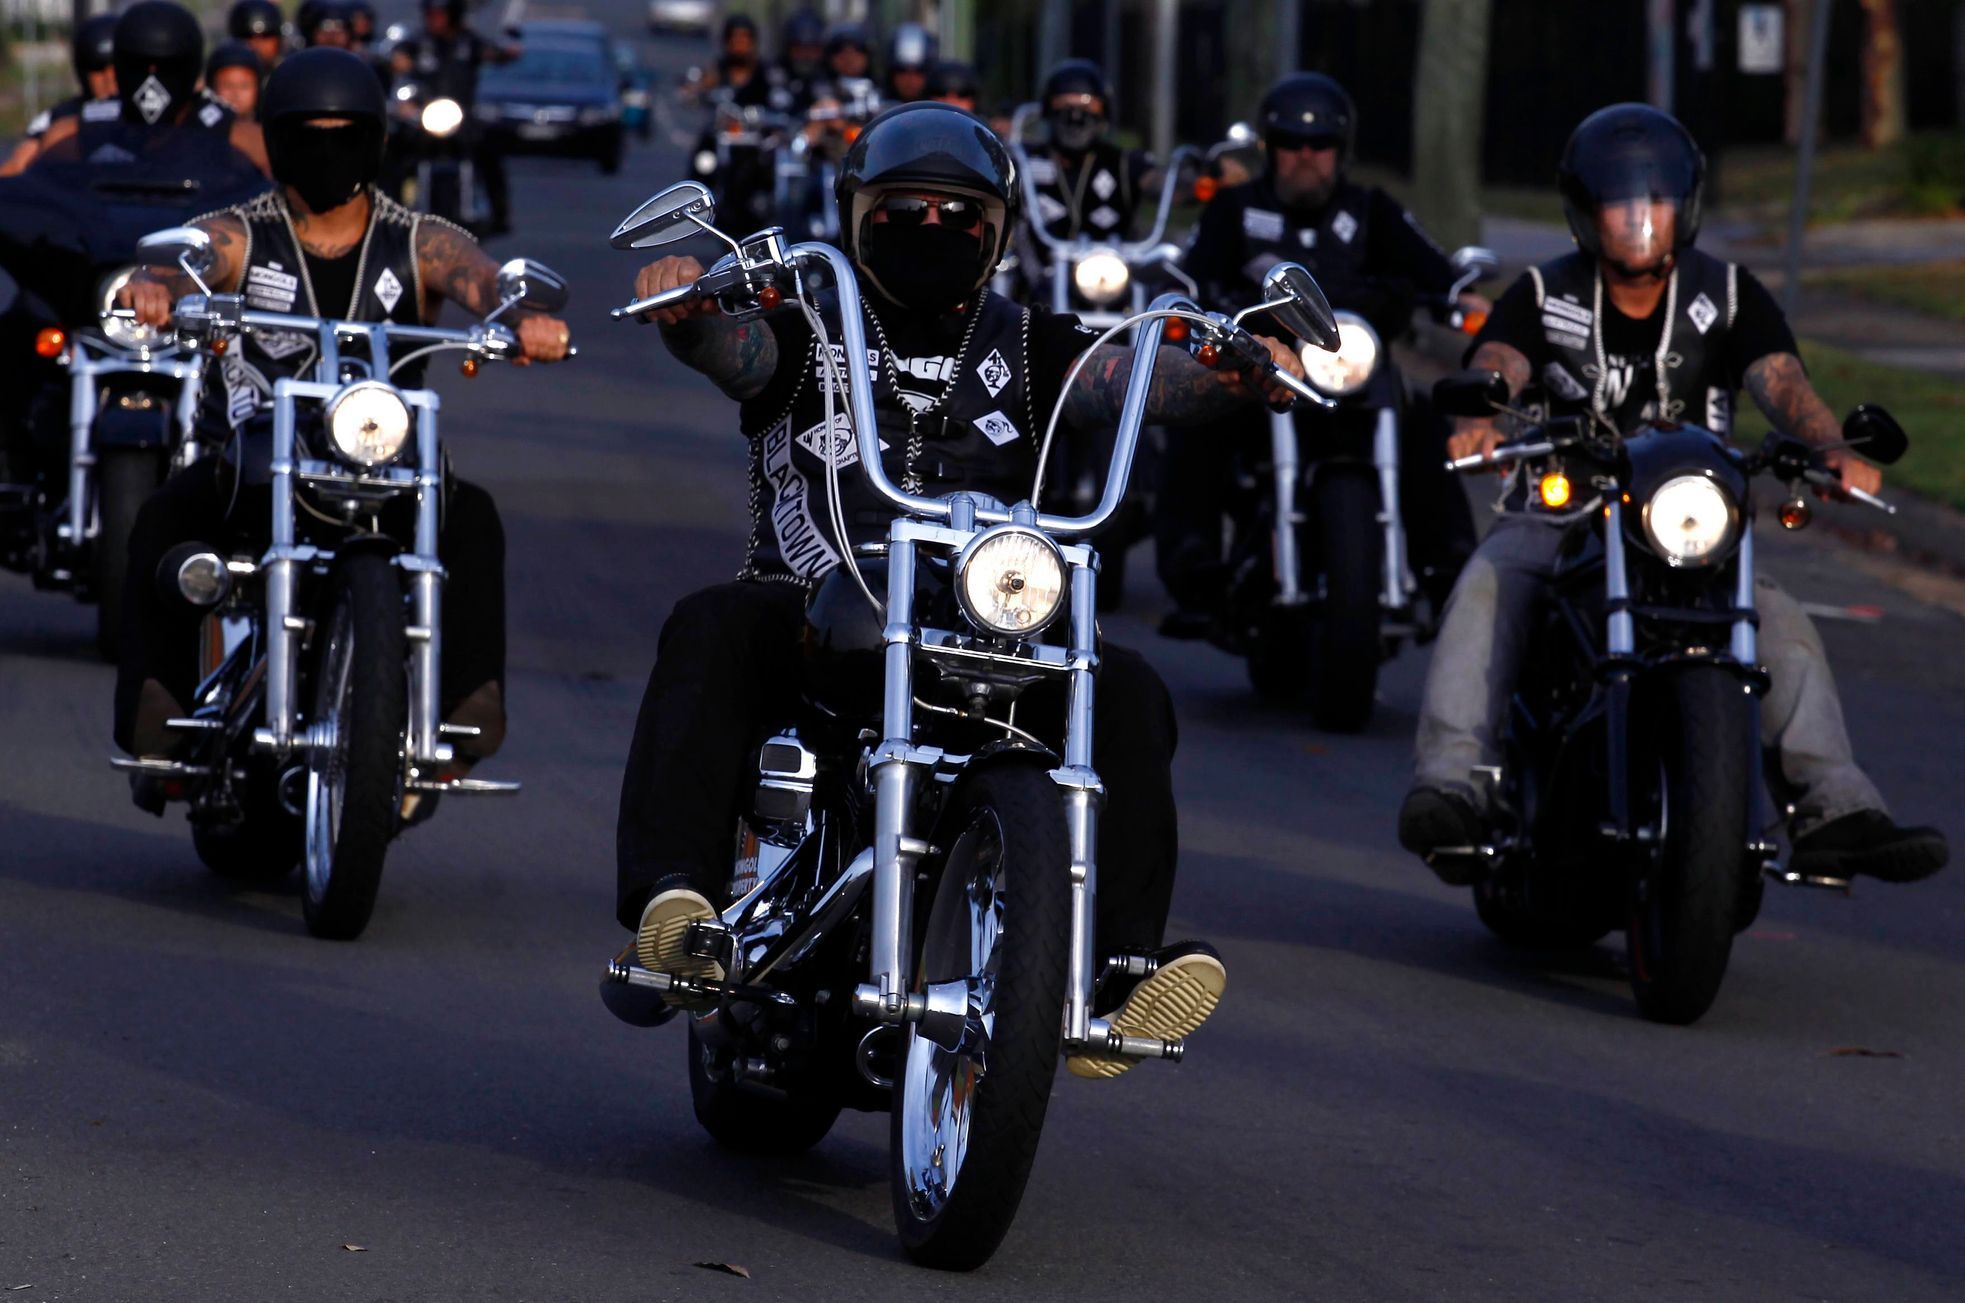 Members of the Mongols Motorcycle Club